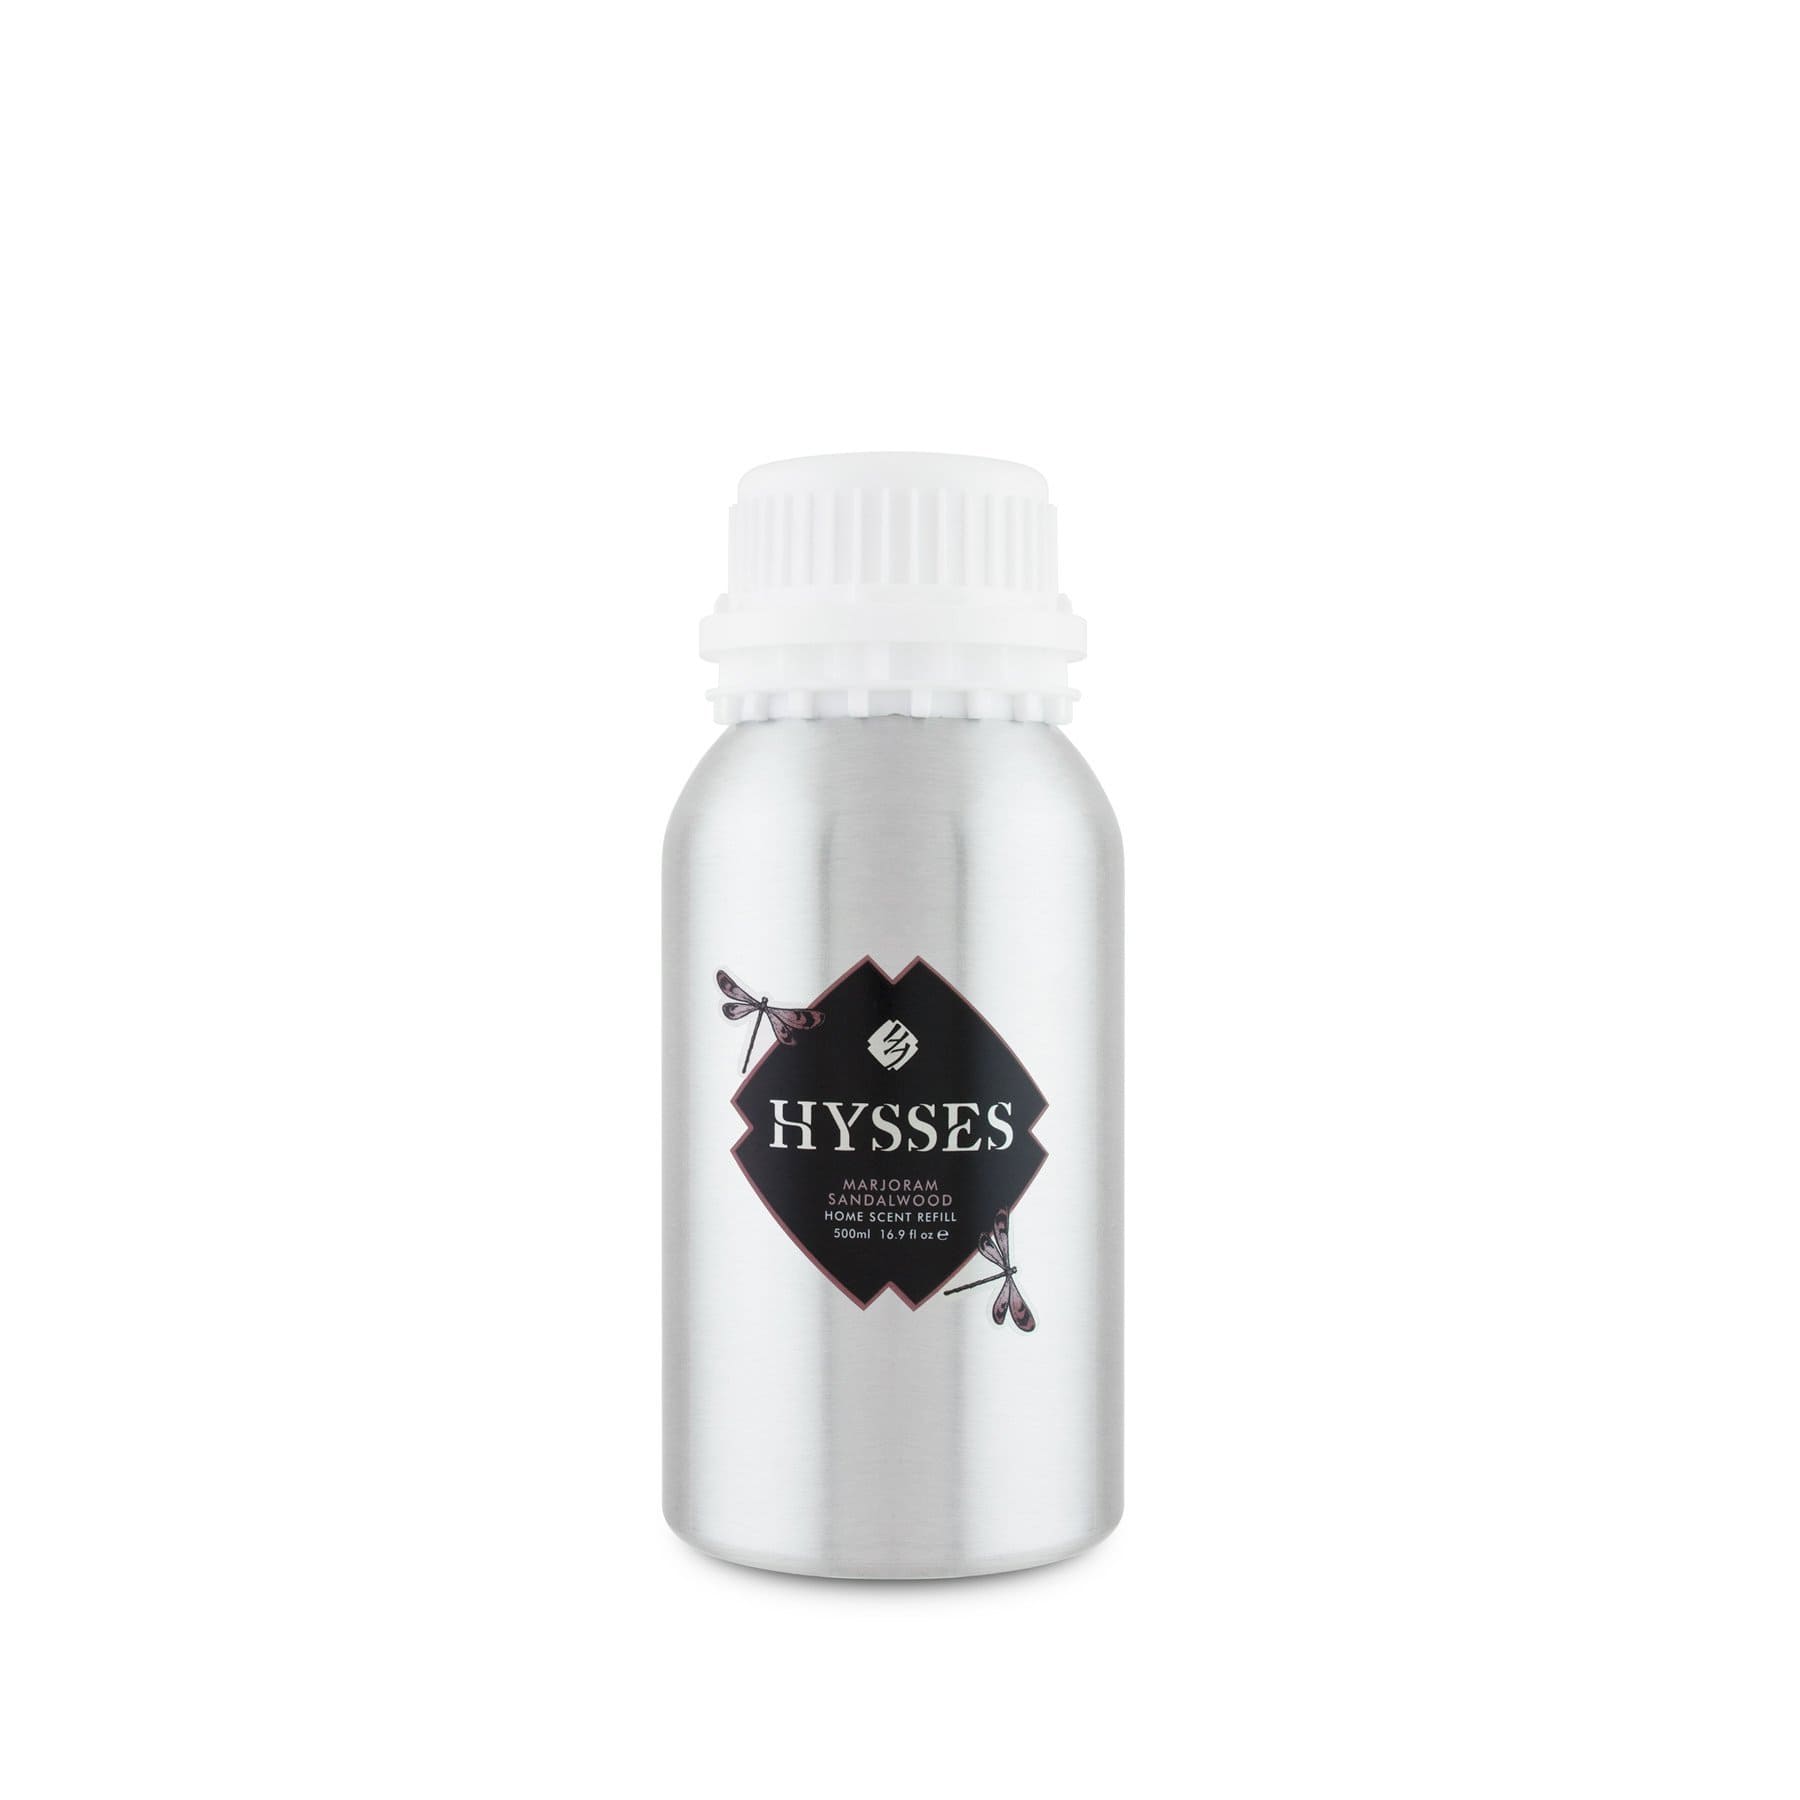 Hysses Home Scents 500ml Refill Home Scent Marjoram Sandalwood